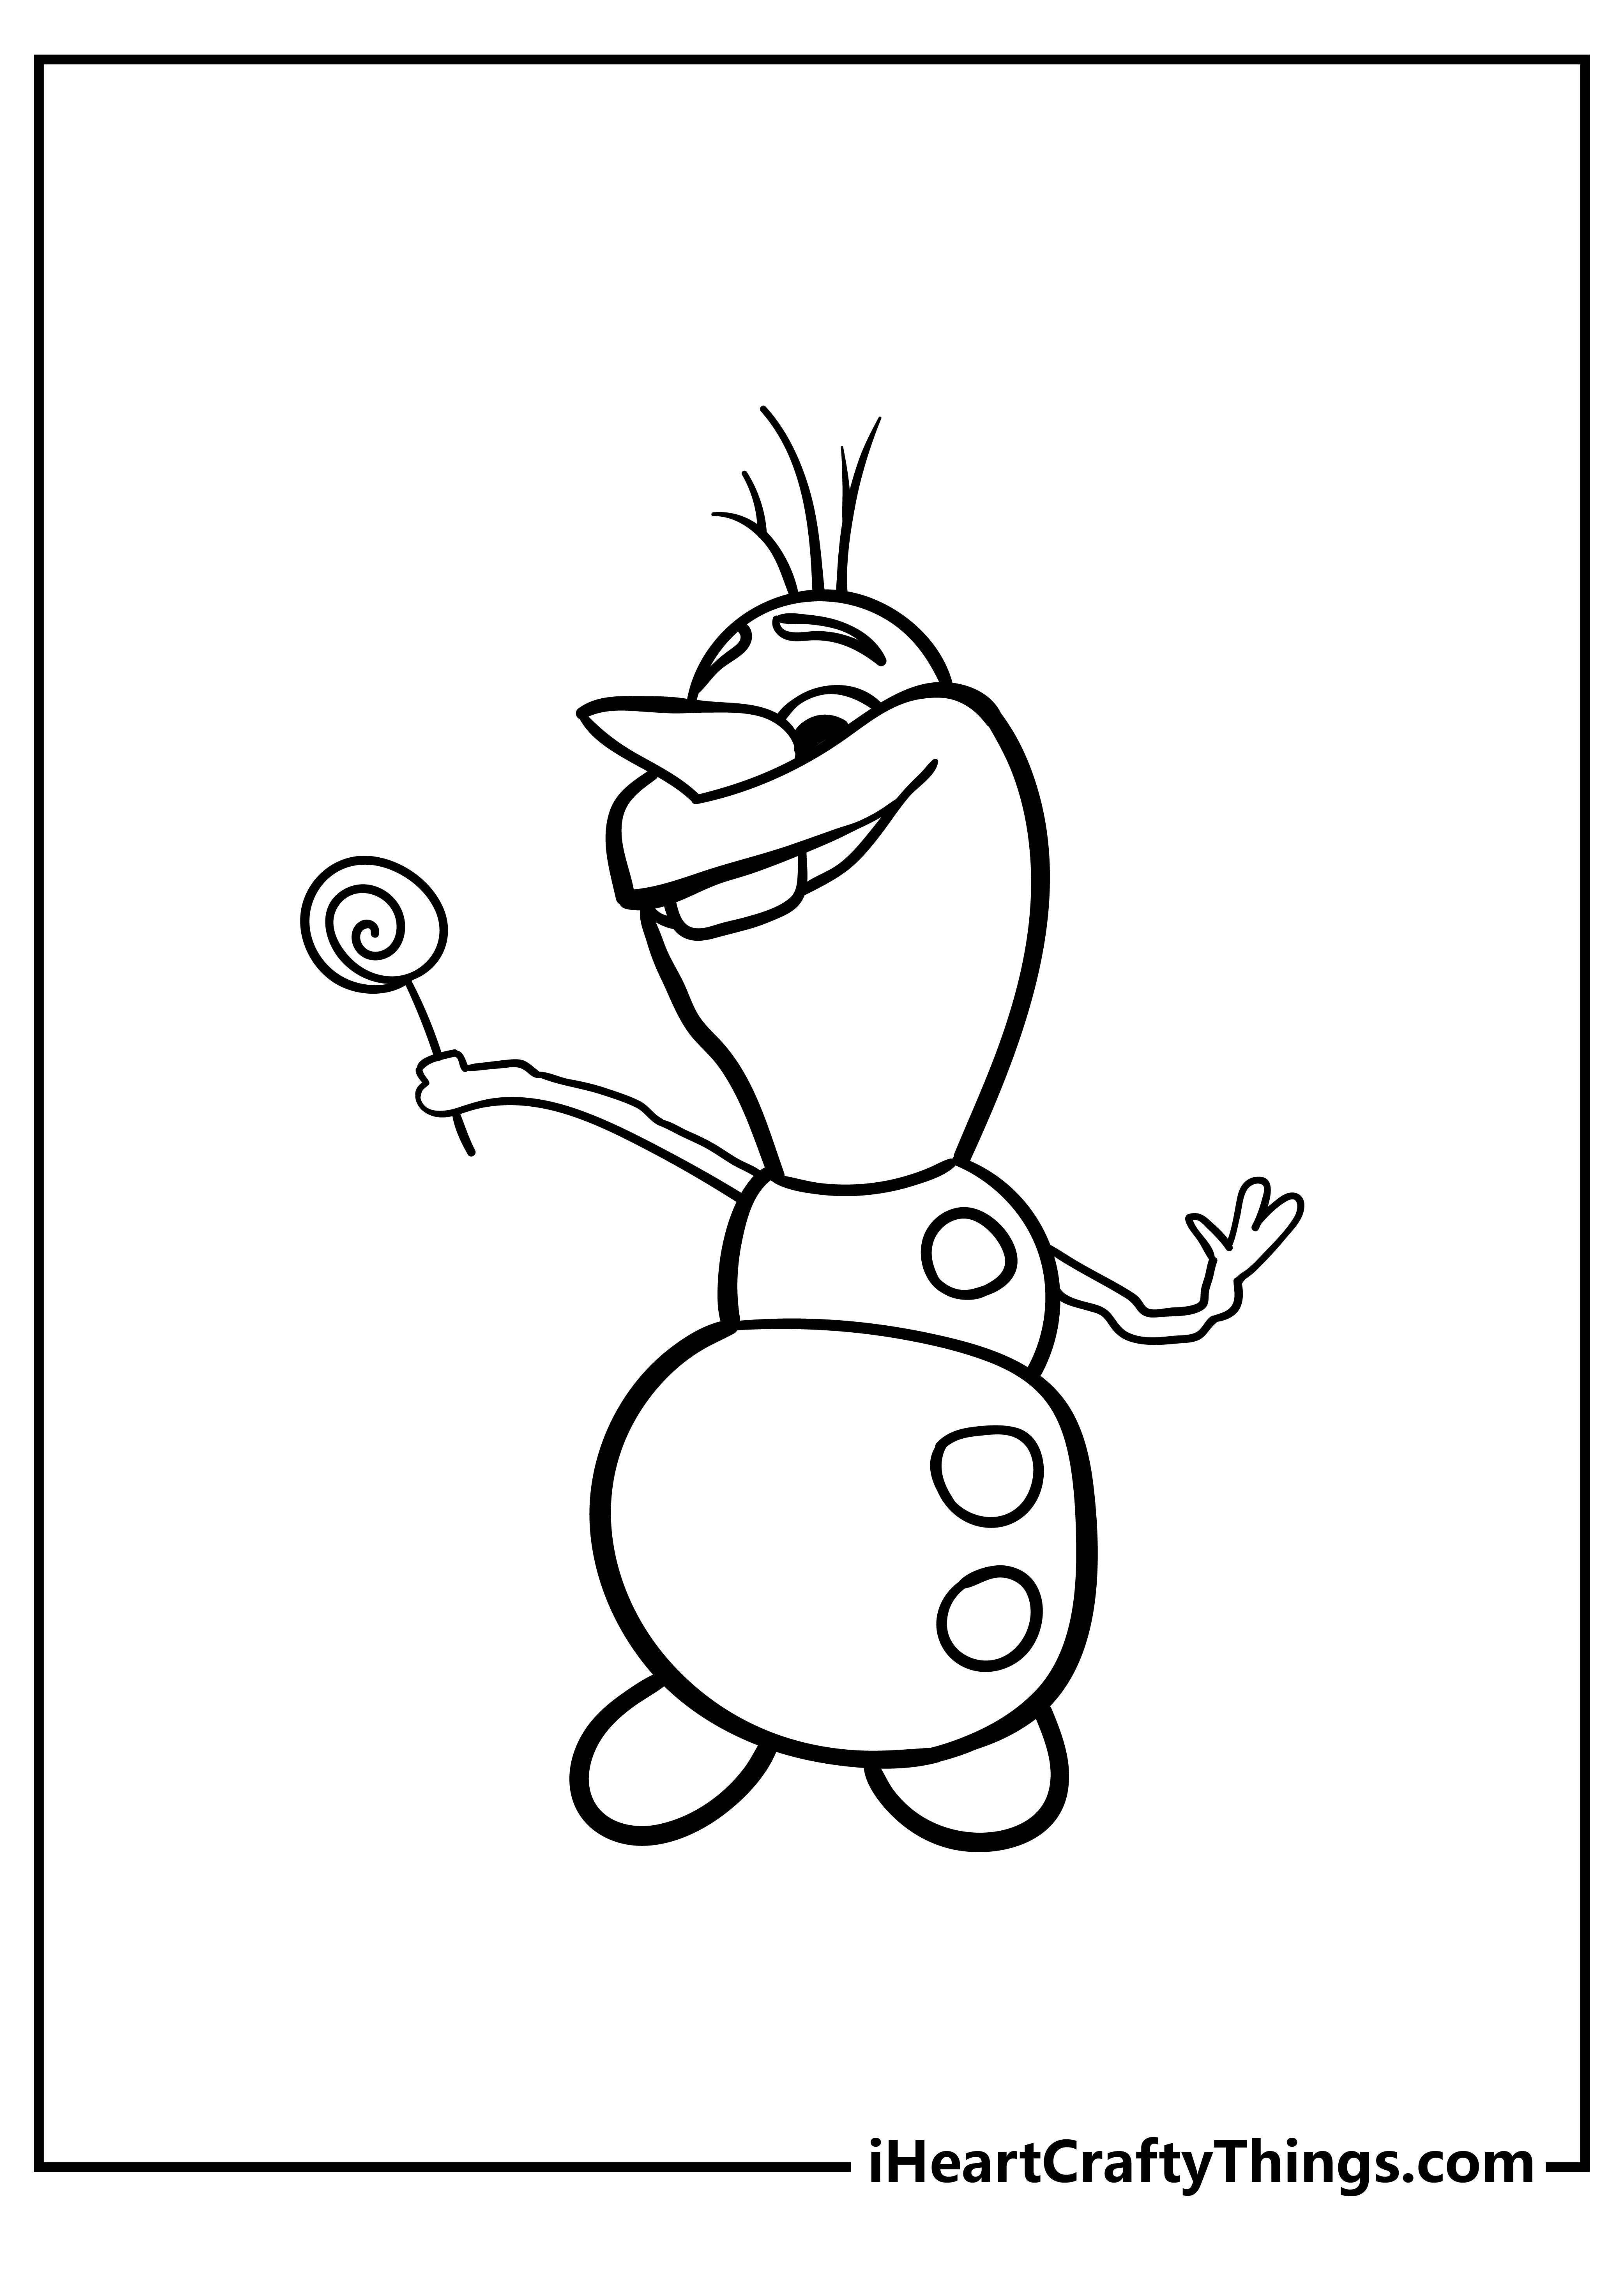 Olaf Coloring Sheet for children free download